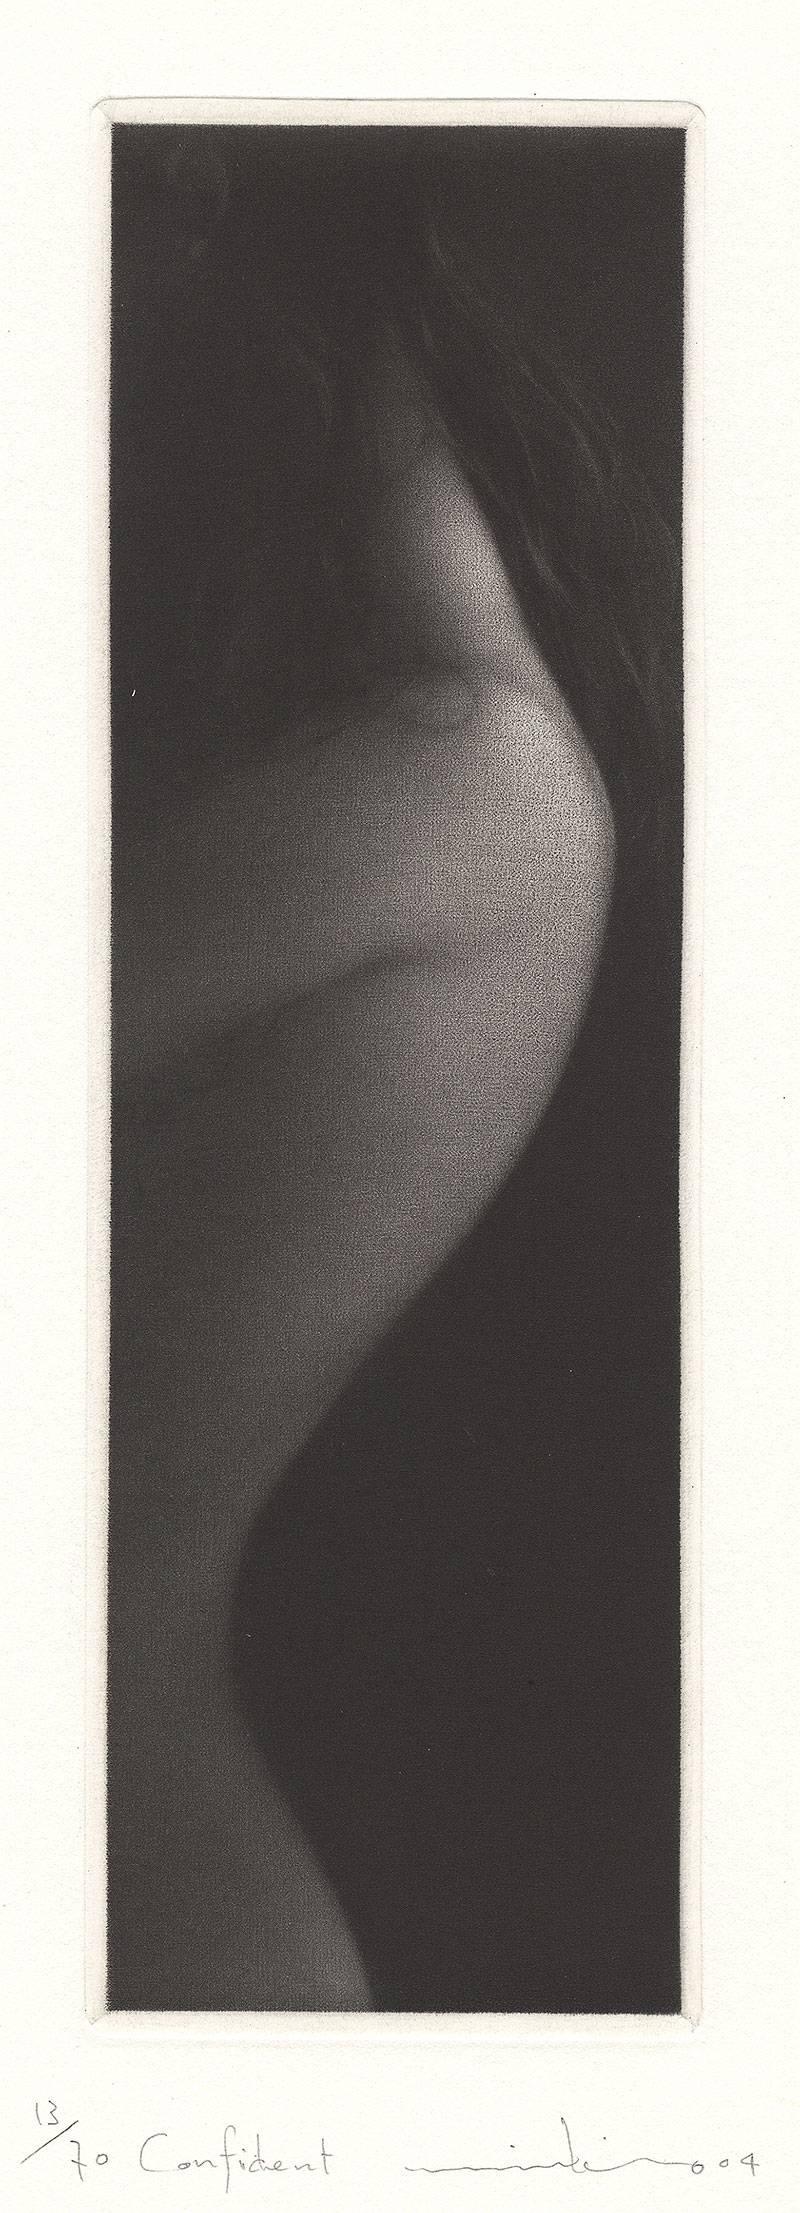 Mikio Watanabe Figurative Print - Confident (profile of sensual young woman with wisps of hair on her neck)